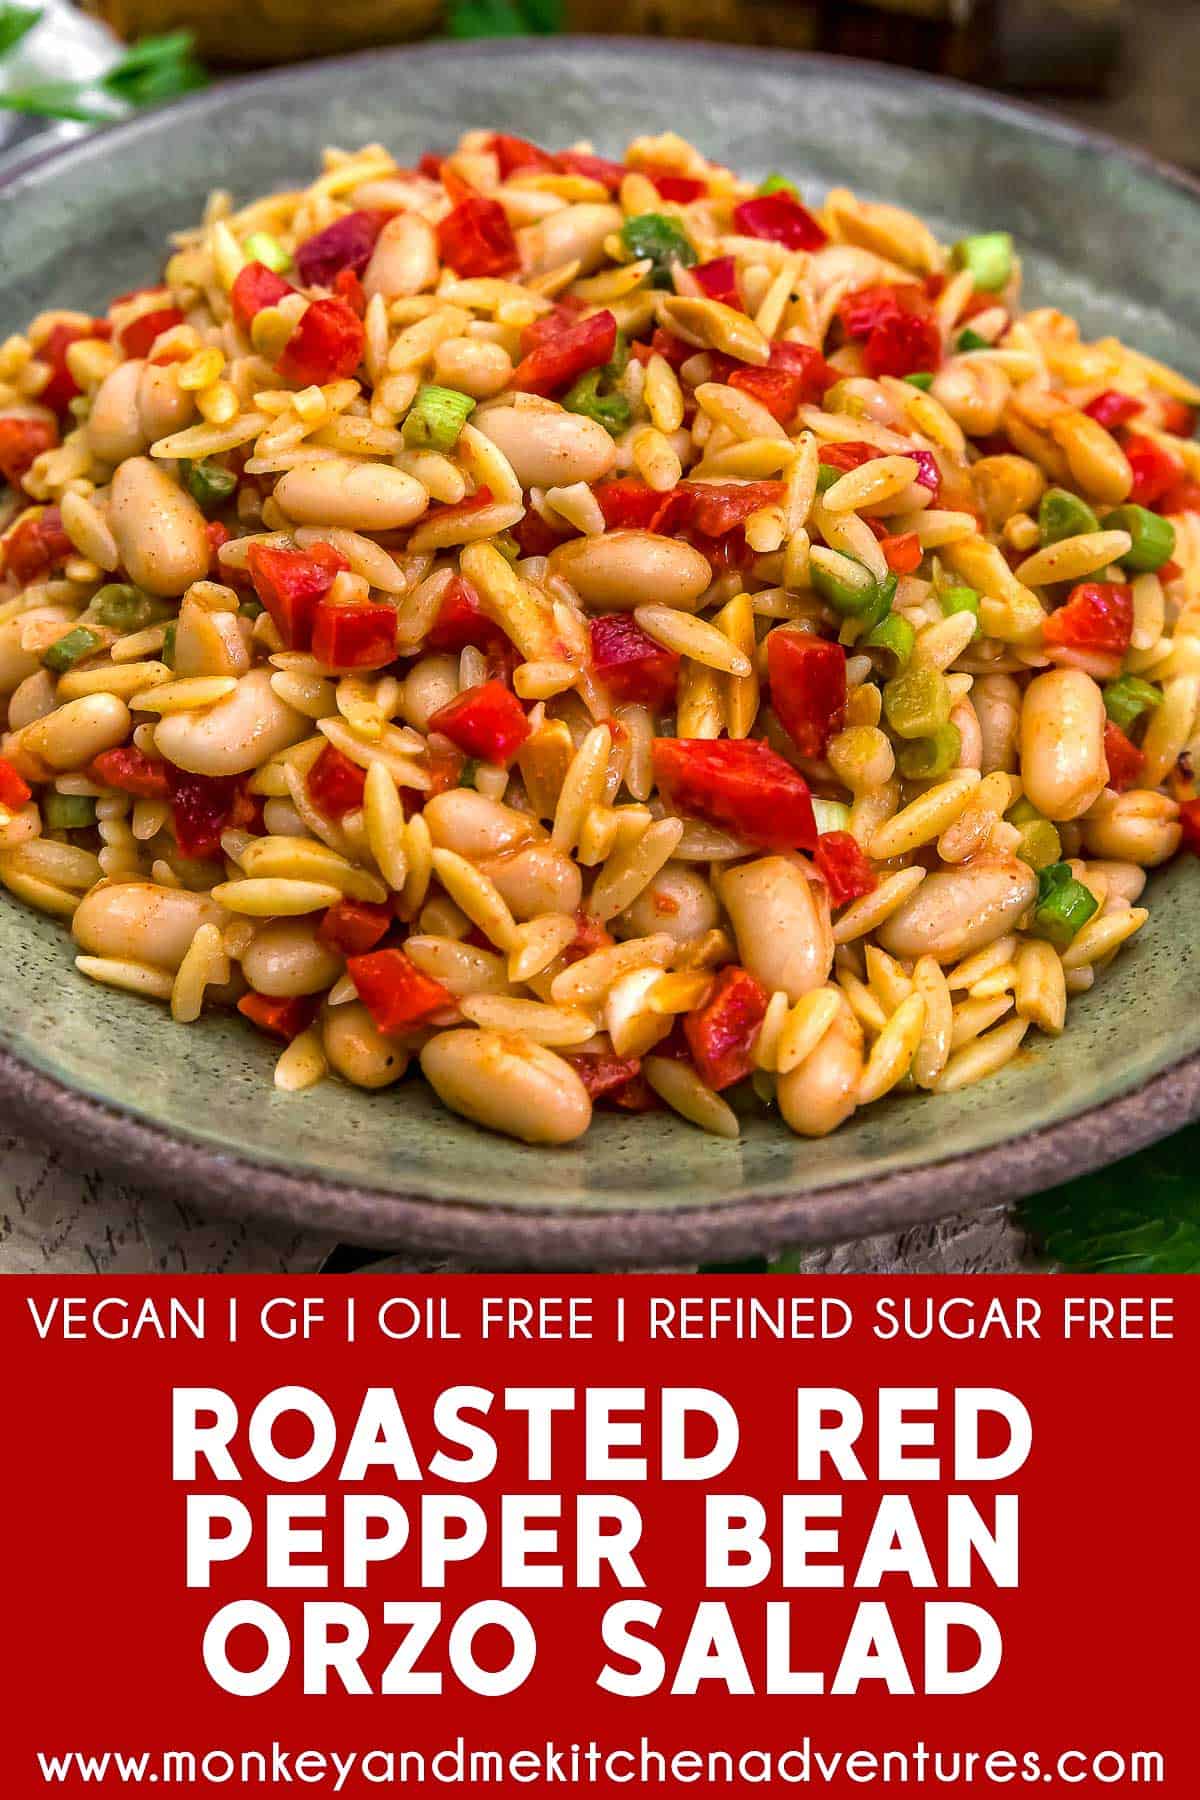 Roasted Red Pepper Bean Orzo Salad with text description